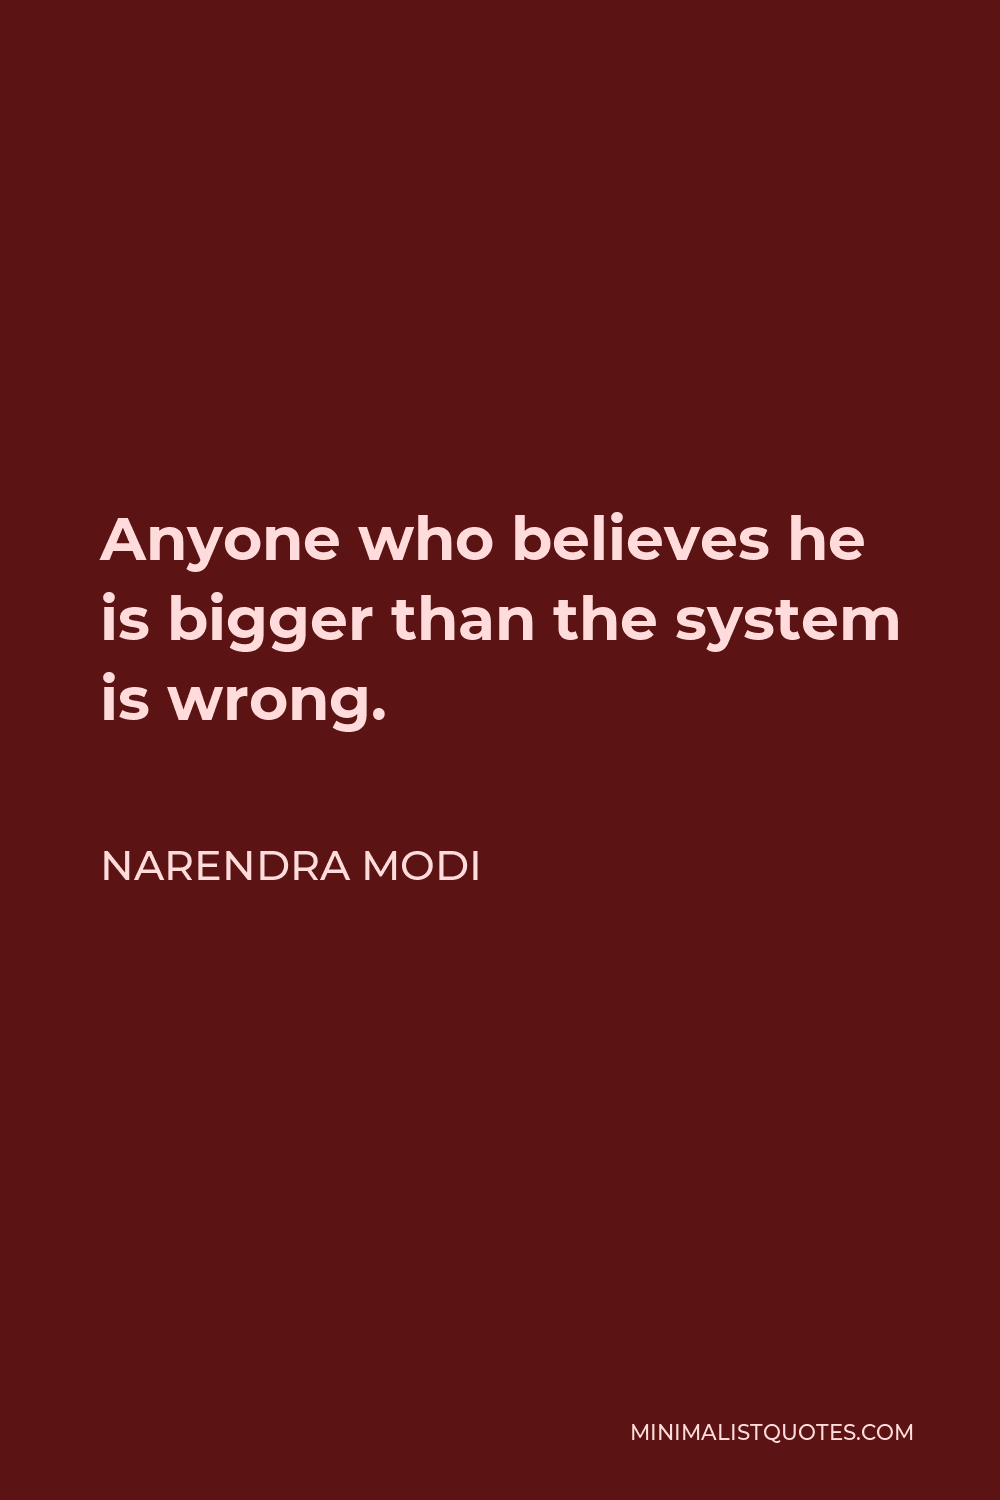 Narendra Modi Quote - Anyone who believes he is bigger than the system is wrong.